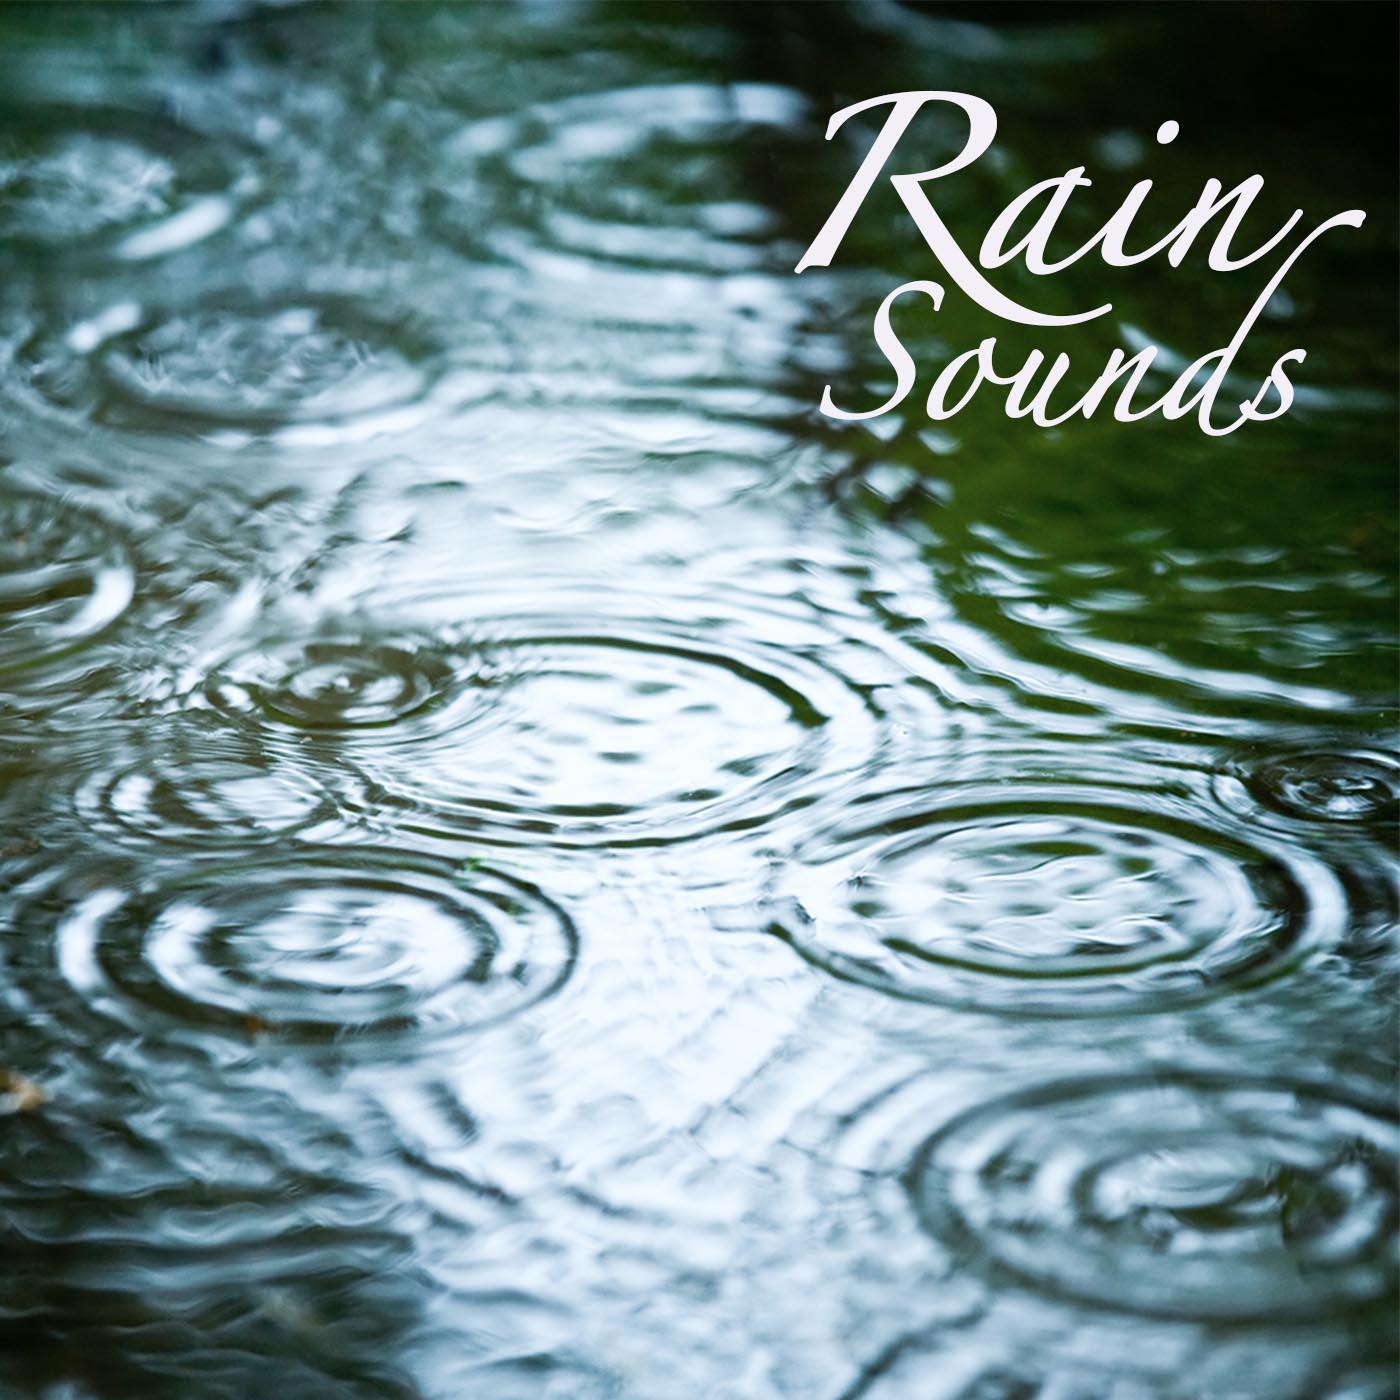 Rain Sounds: Rain Sound Meditation, Relaxing Sound of Rain, Massage Yoga Music and Ambient Soothing Sounds